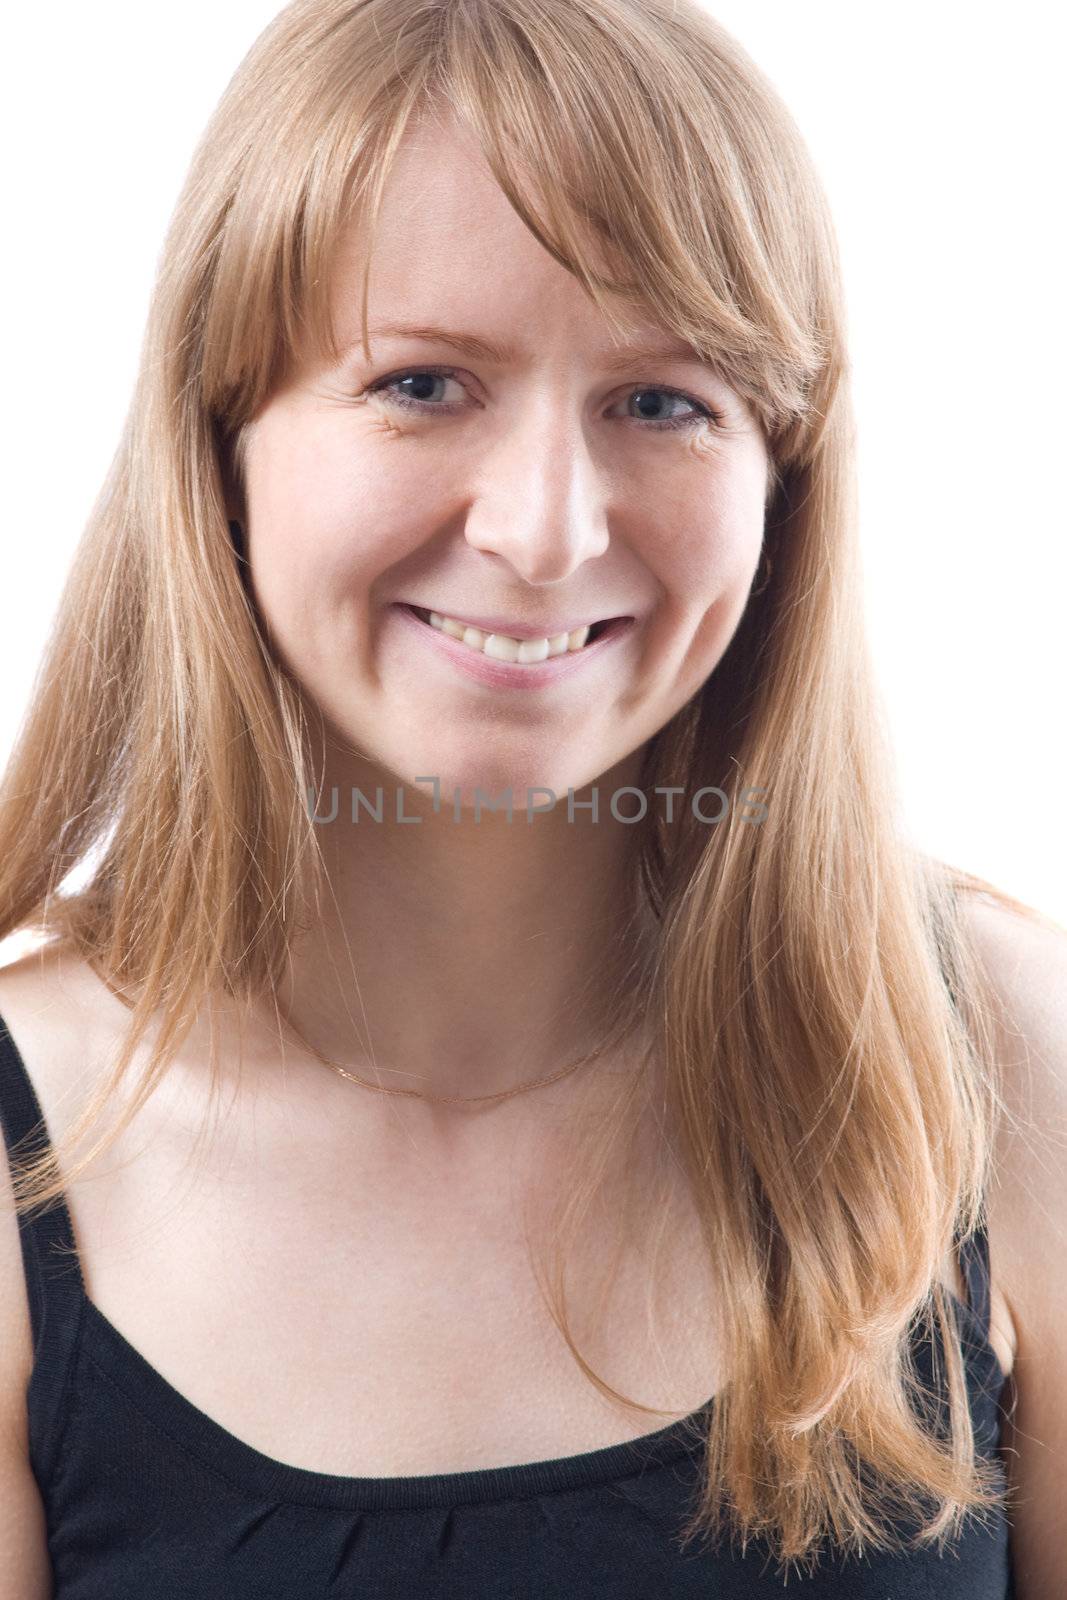 Portrait of young smiling woman. Isolated on white.